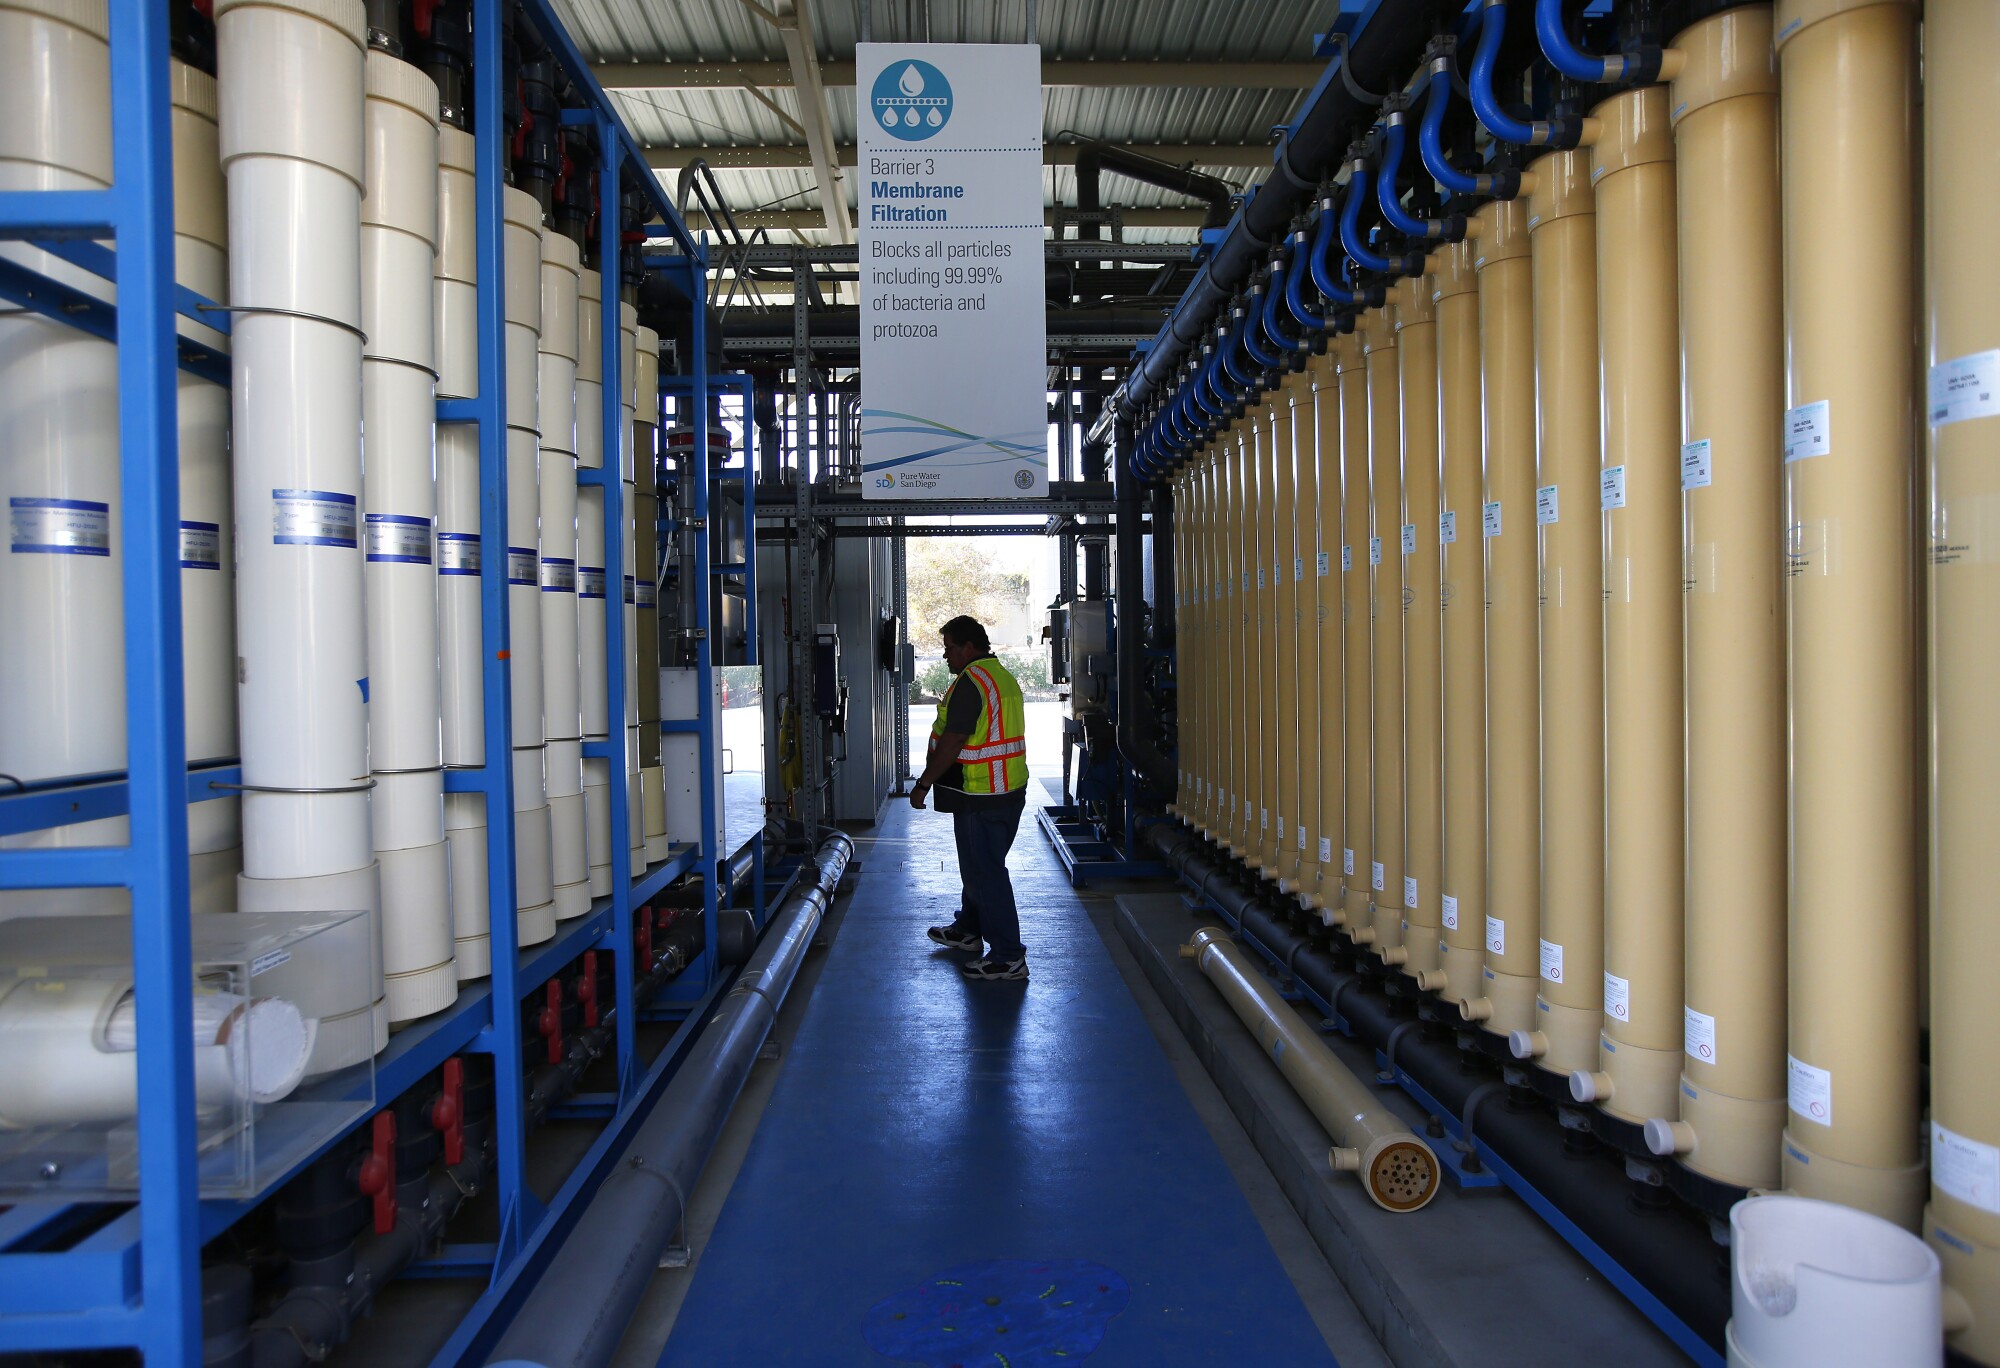 The membrane filtration columns at the Pure Water Demonstration Facility in San Diego